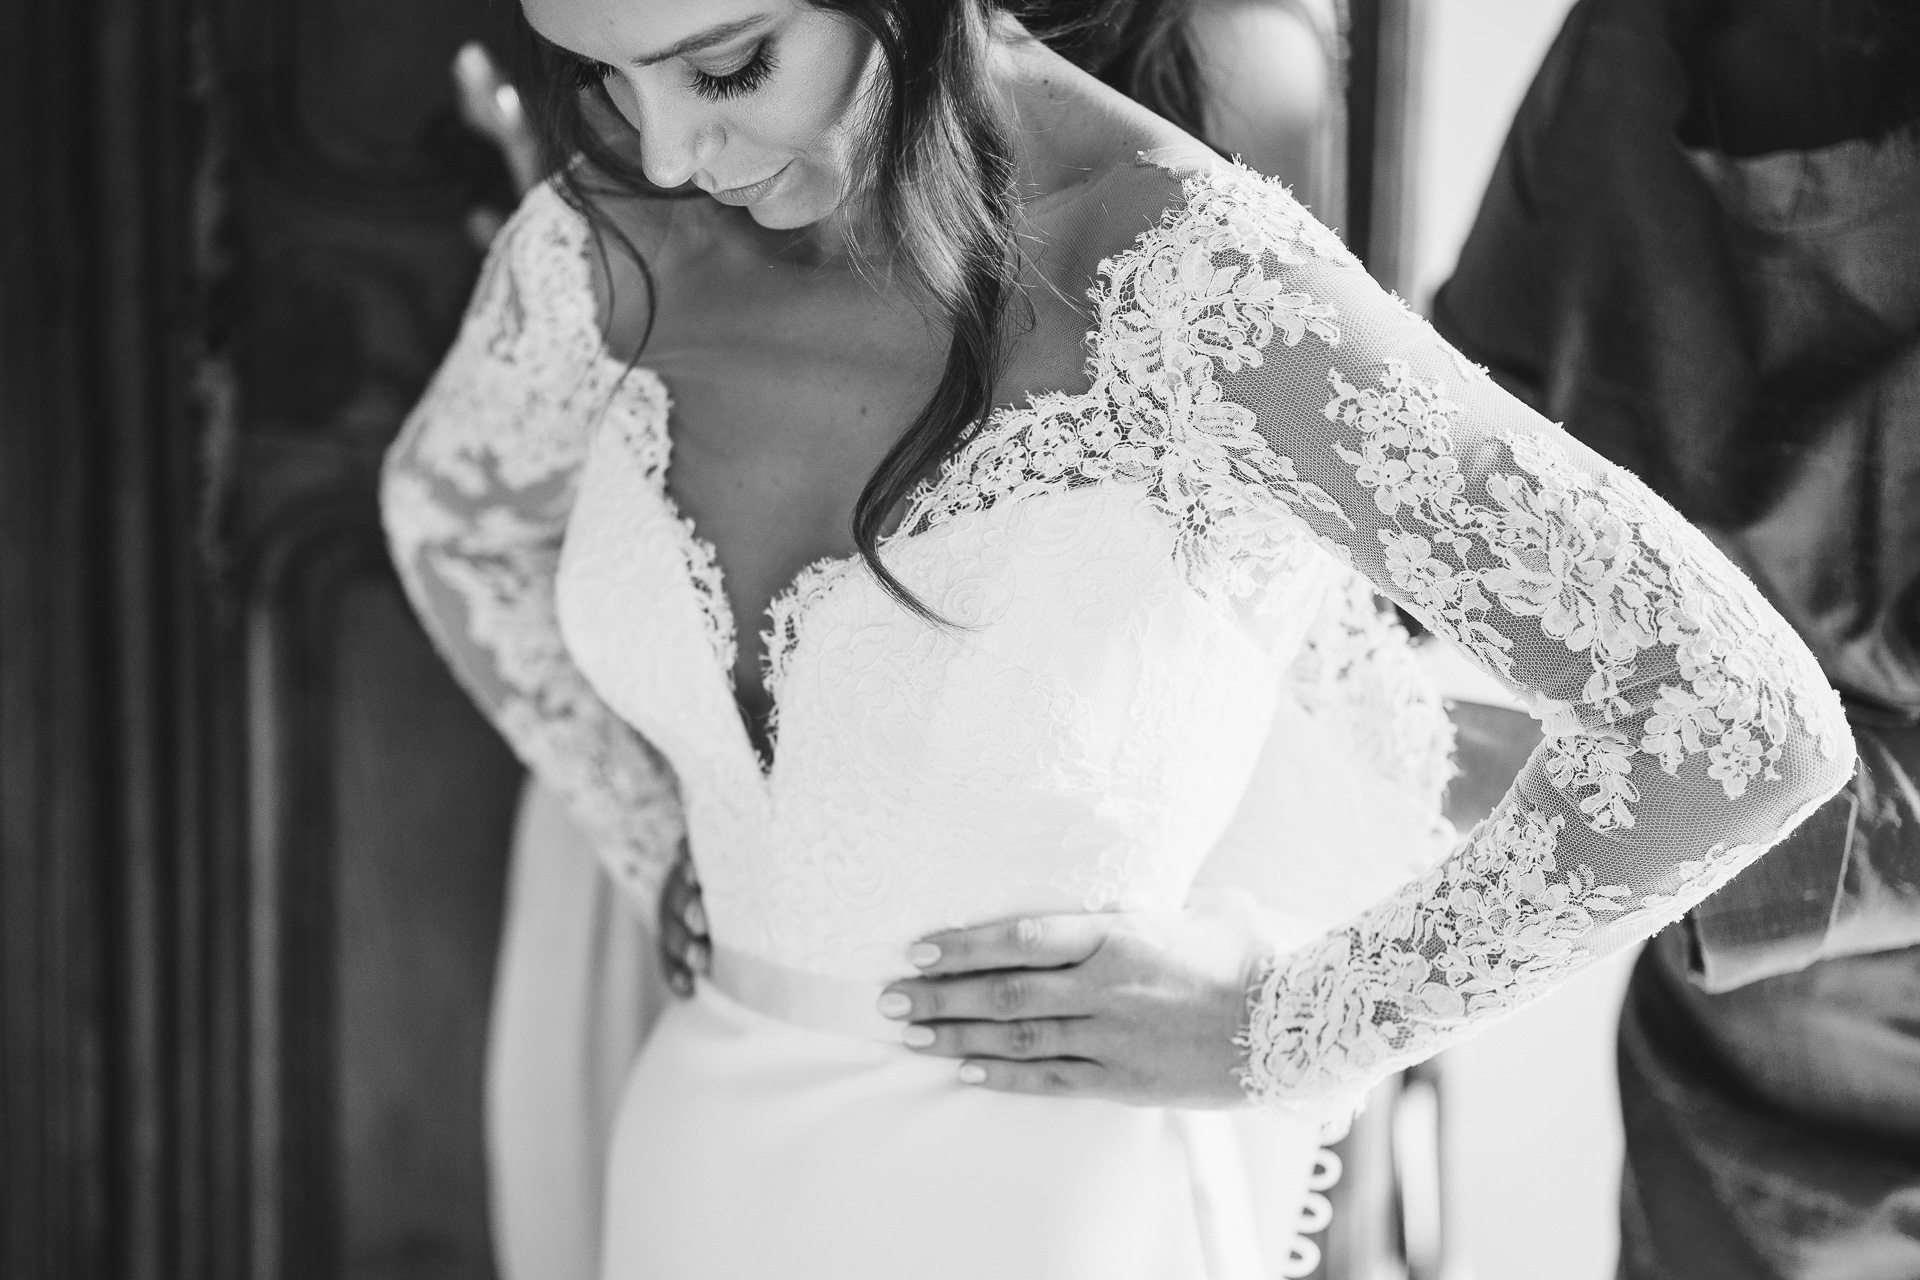 Bride putting on a lace wedding dress